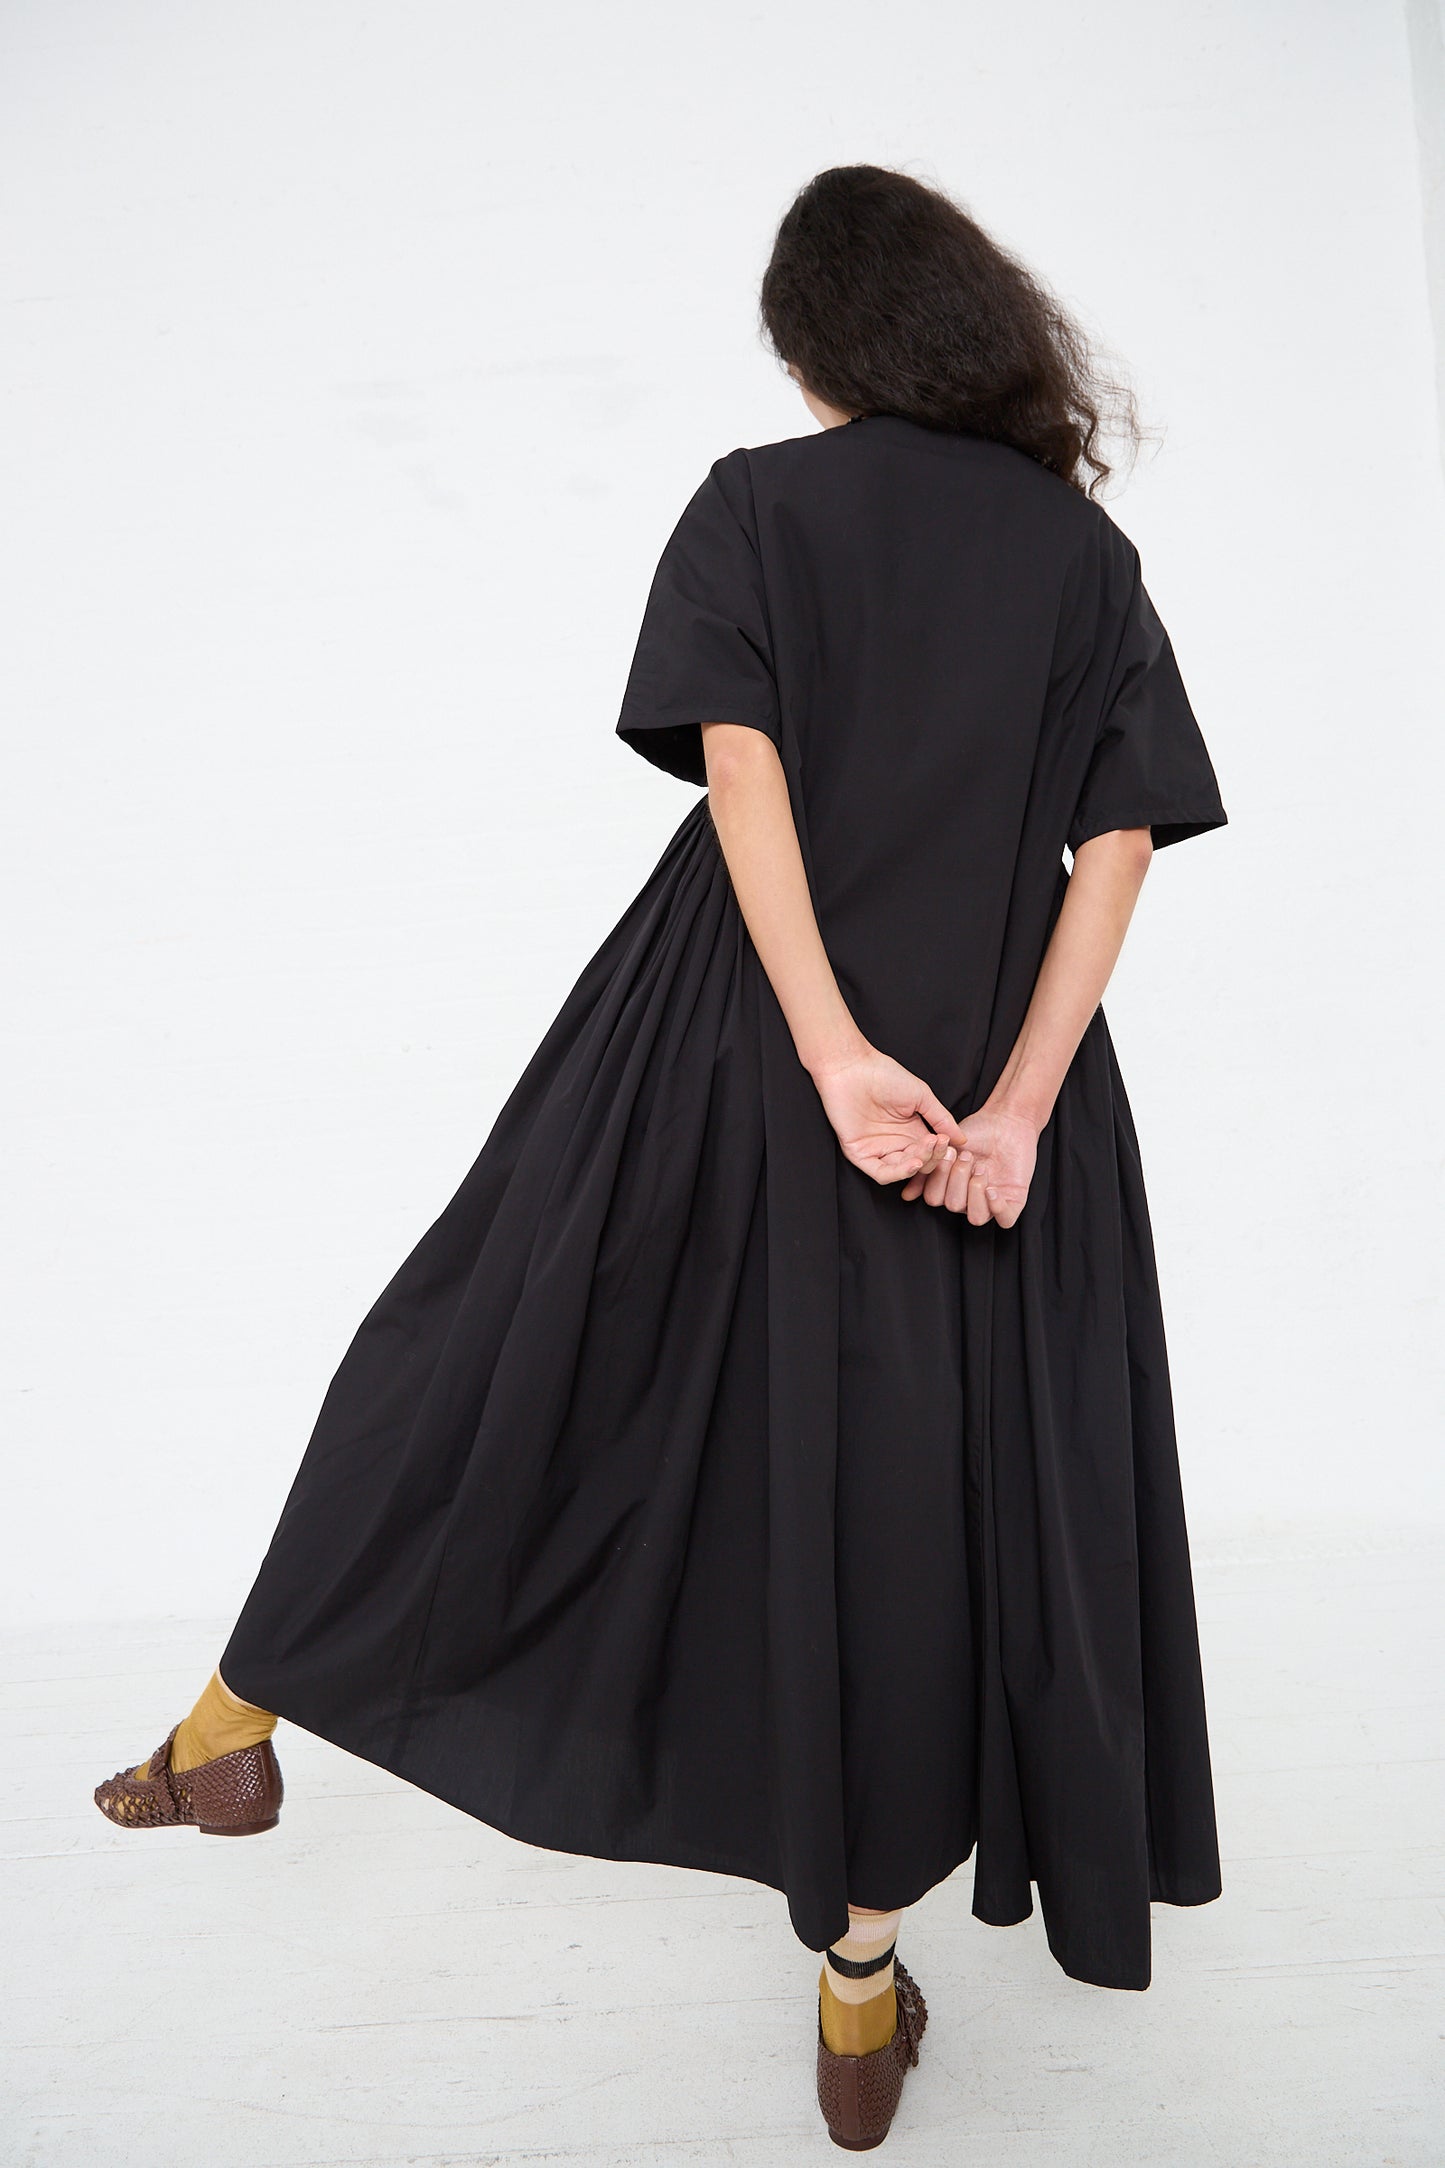 A person viewed from behind wearing a flowing Black Crane Organic Cotton Star Neck Dress in Black and patterned shoes, embodying Los Angeles fashion.